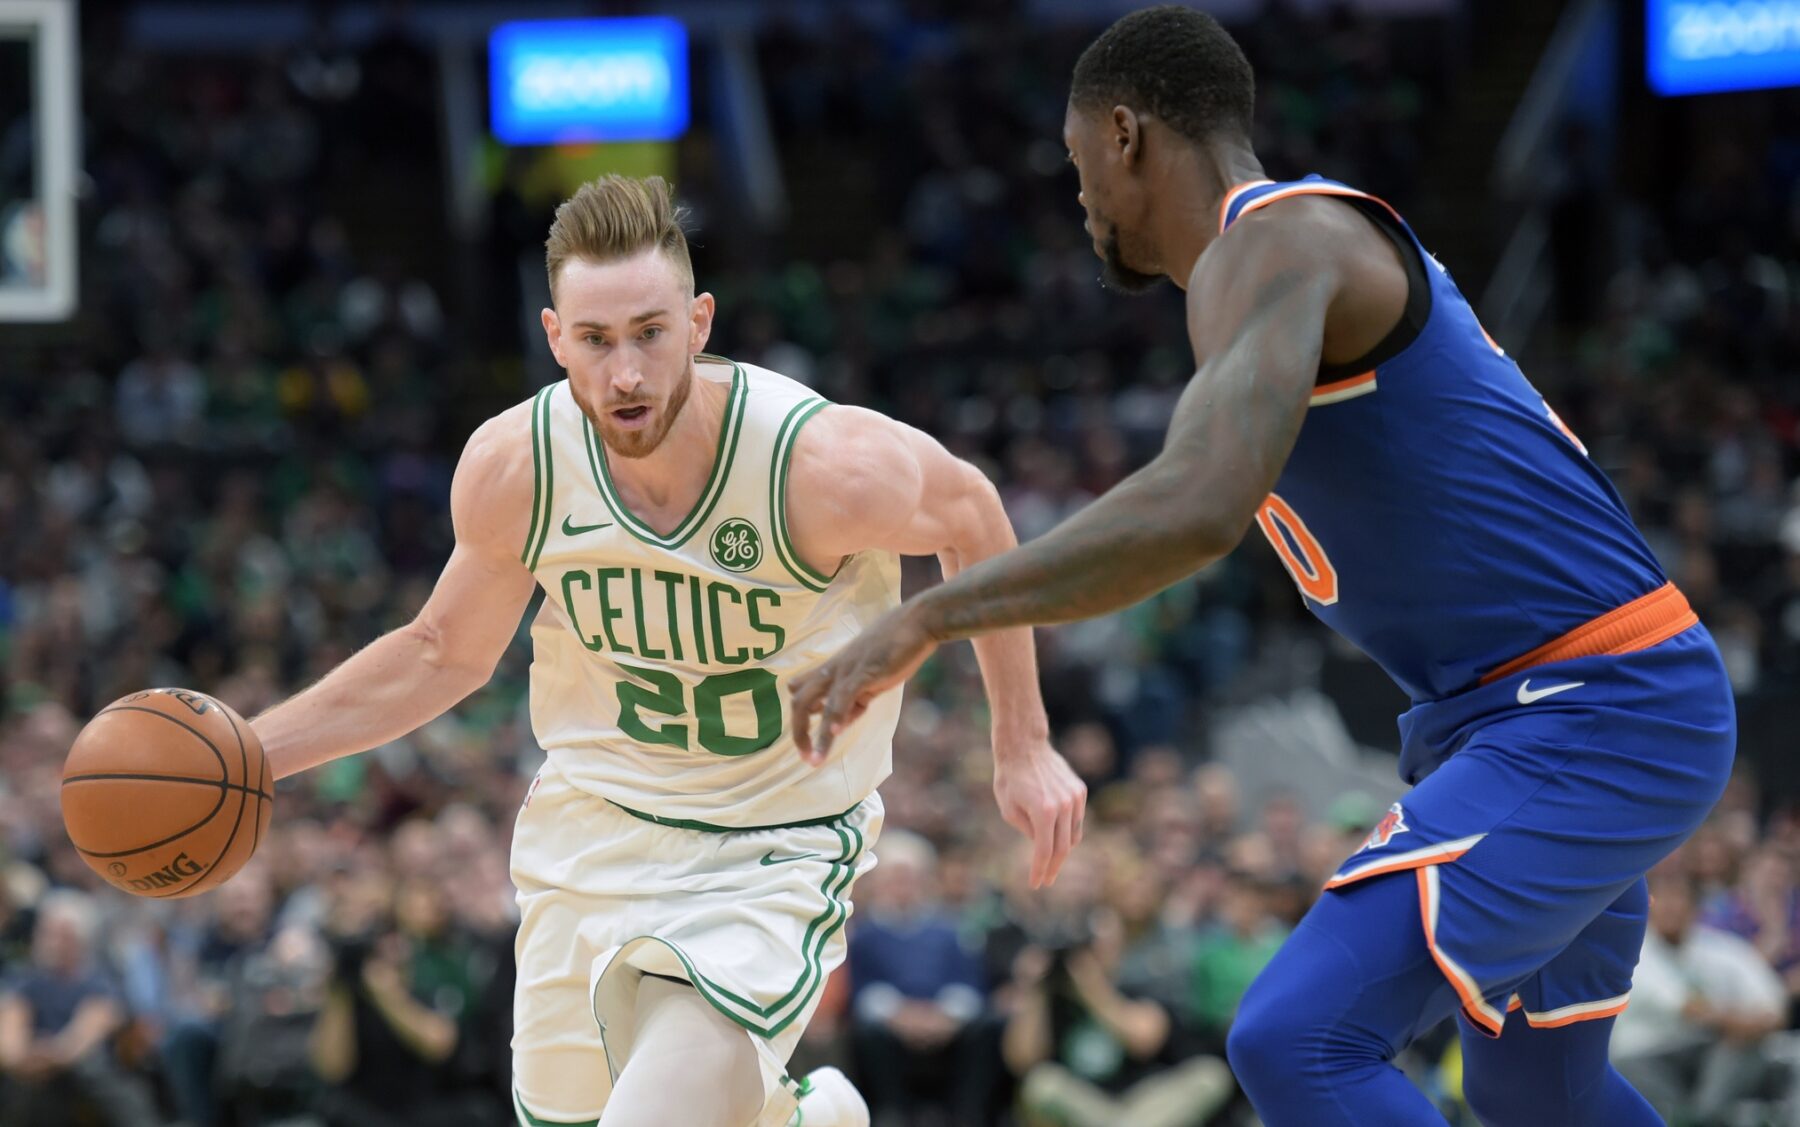 Report: Celtics and Pacers both offered Gordon Hayward contracts worth over  $100 million - Ahn Fire Digital